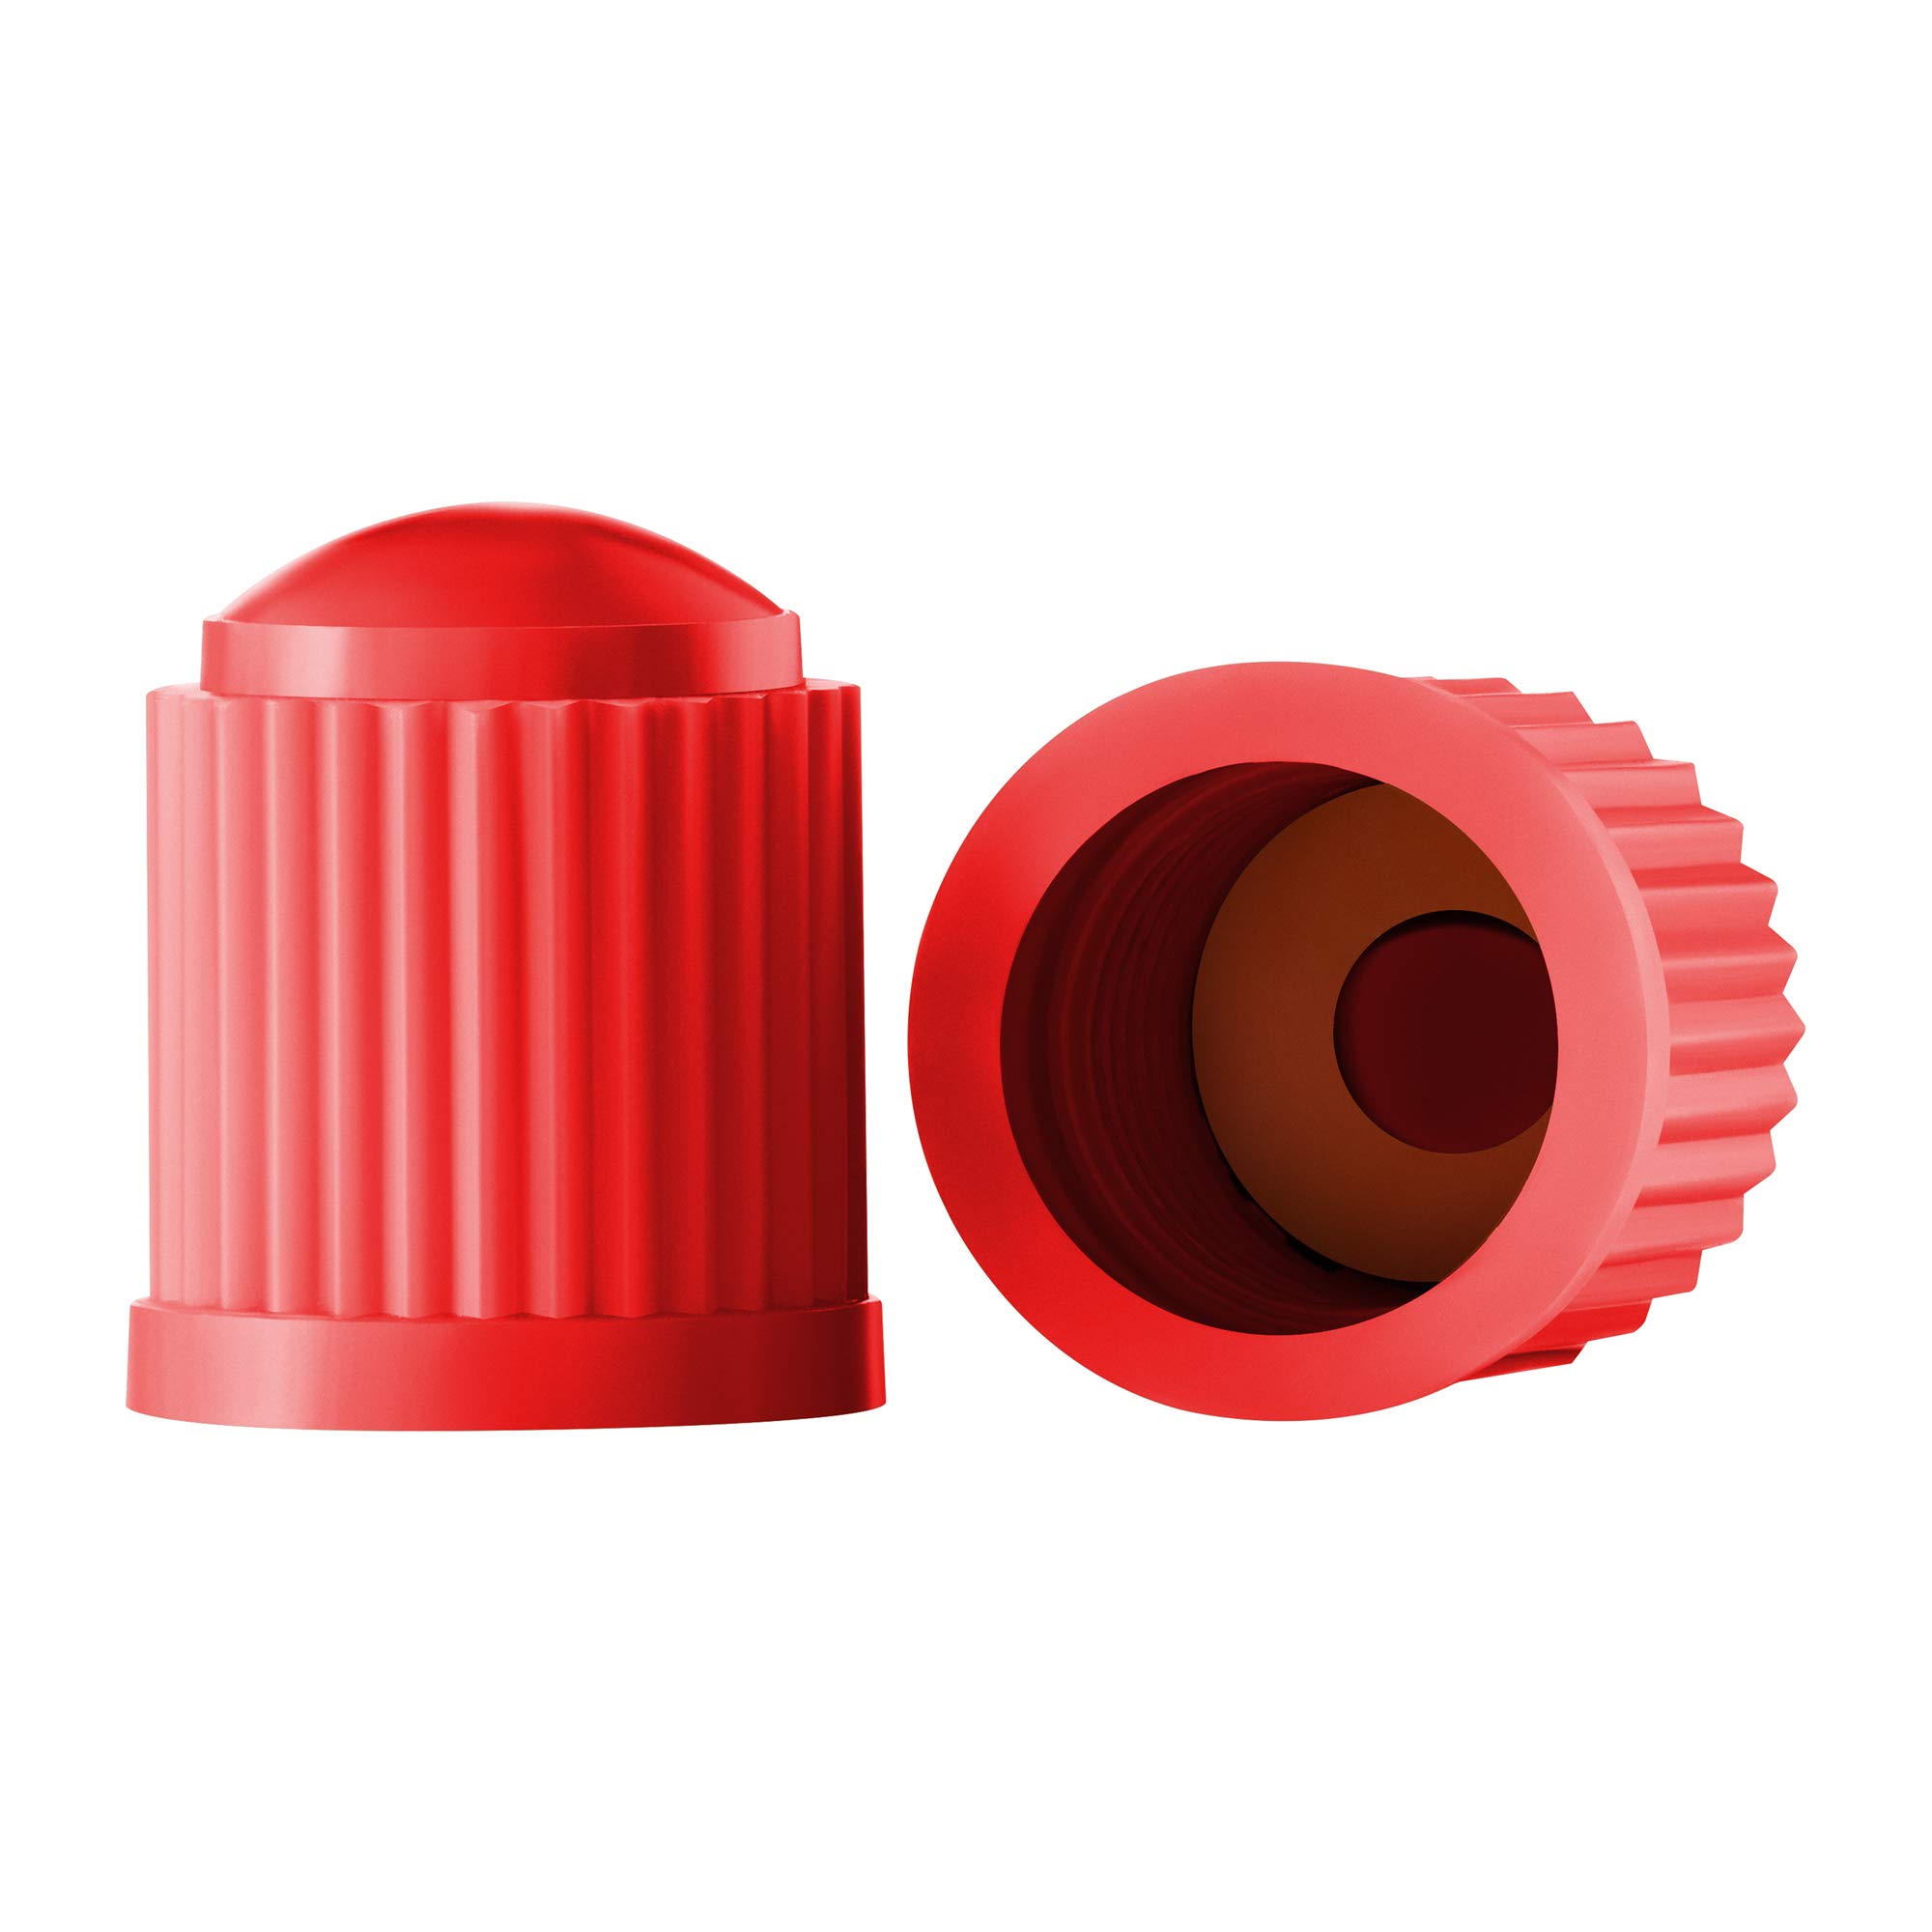 Book Cover Valve-Loc Tire Valve Caps (25-Pack) Red, Universal Stem Covers for Cars, SUVs, Bike and Bicycle, Trucks, Motorcycles | Heavy-Duty, Airtight Seal | Screw-On, Easy-Grip Use (Red)